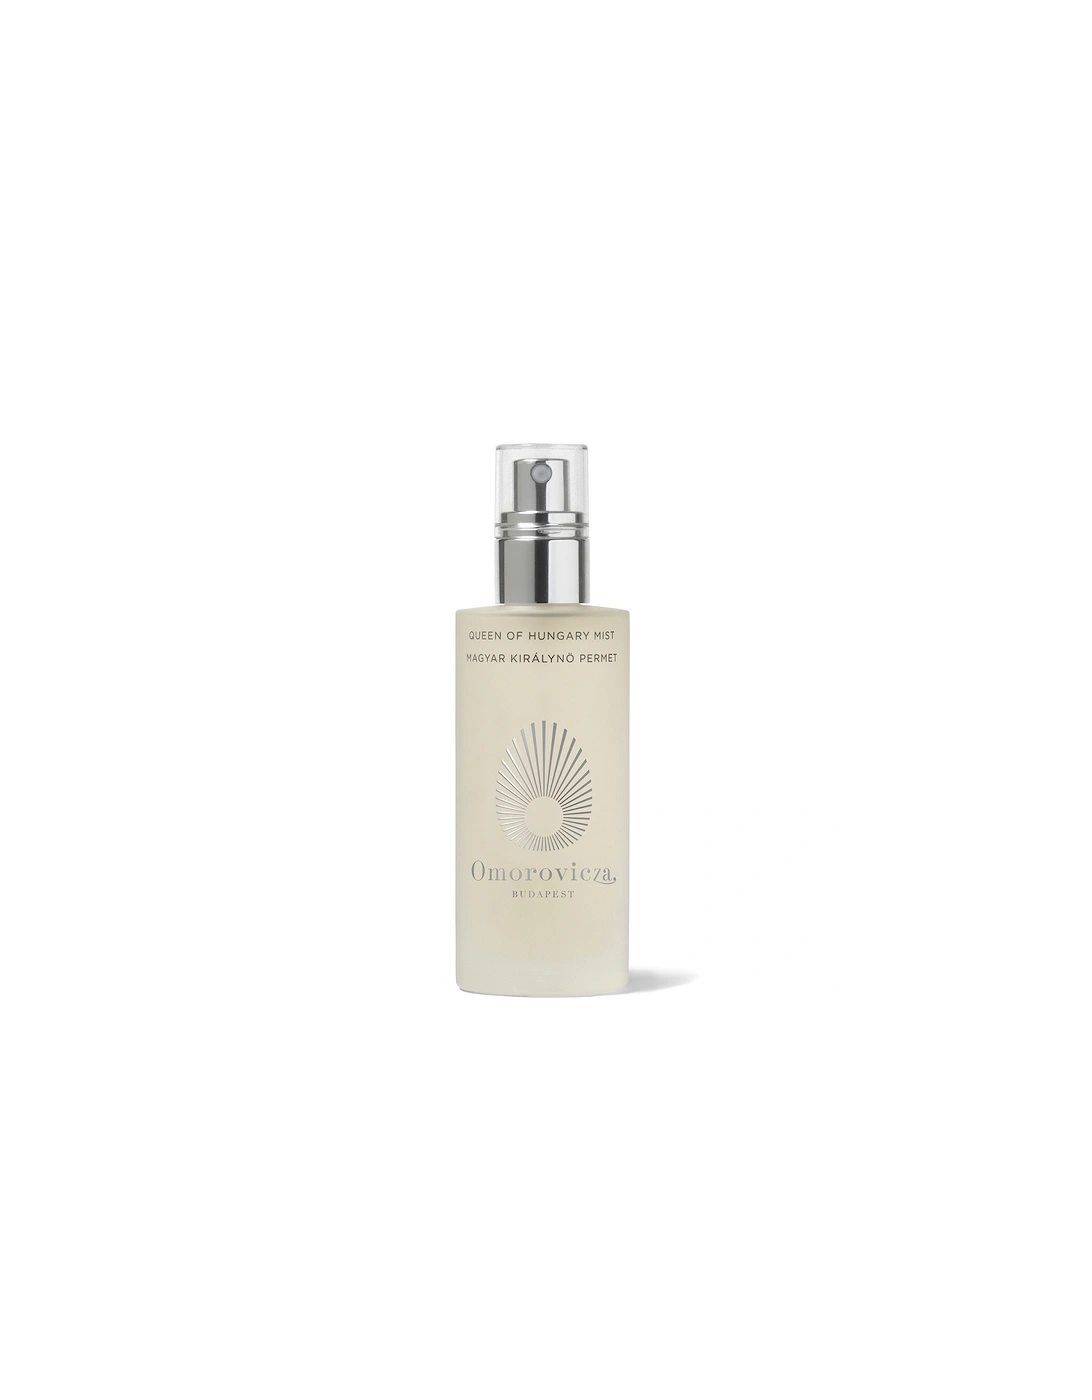 Queen Of Hungary Mist (100ml) - Omorovicza, 2 of 1